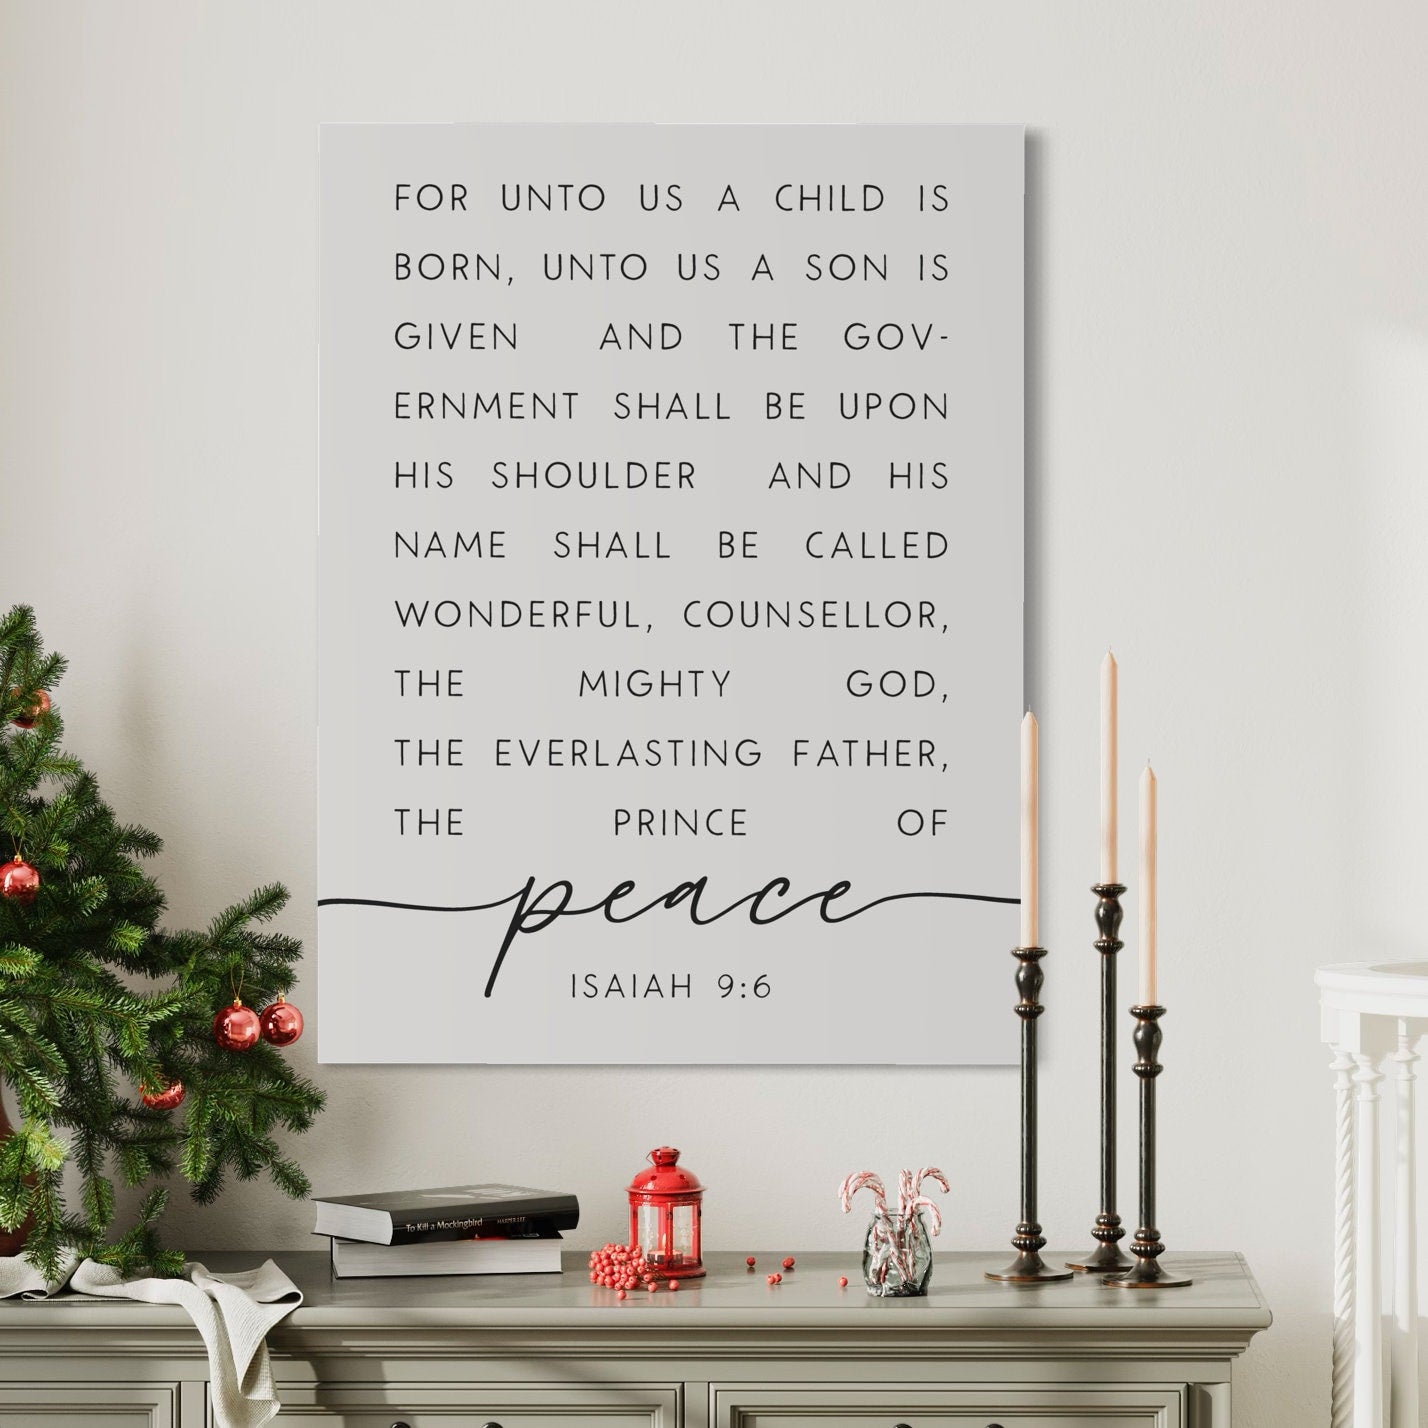 For unto us a child is born Isaiah 9:6, The Christmas Story Canvas Wall Art, Prince of Peace, Christmas Bible Verse Sign, Scripture Wall Art